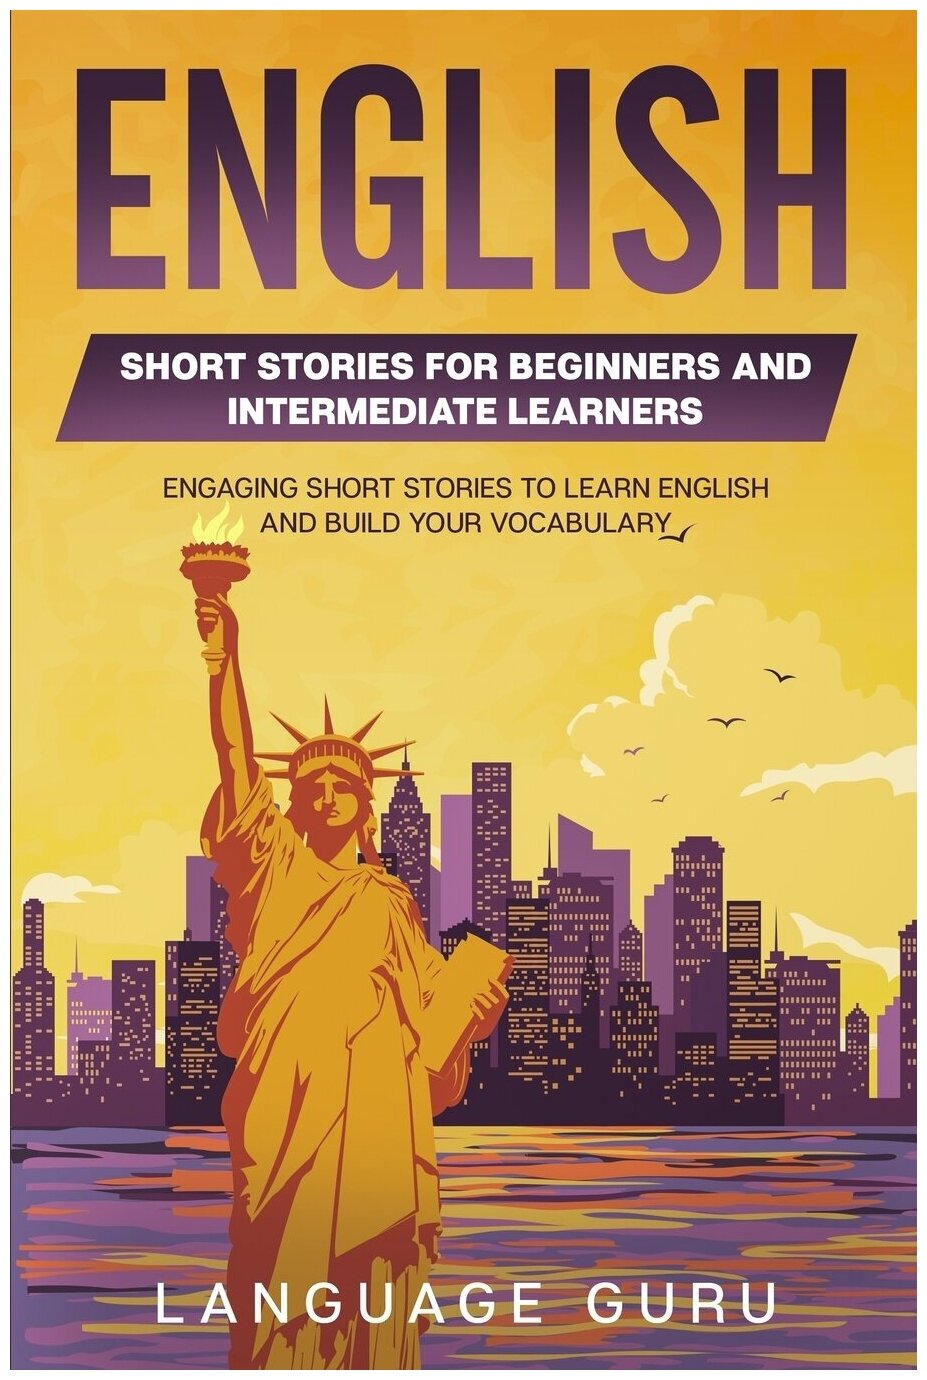 English Short Stories for Beginners and Intermediate Learners. Engaging Short Stories to Learn English and Build Your Vocabulary (2nd Edition)